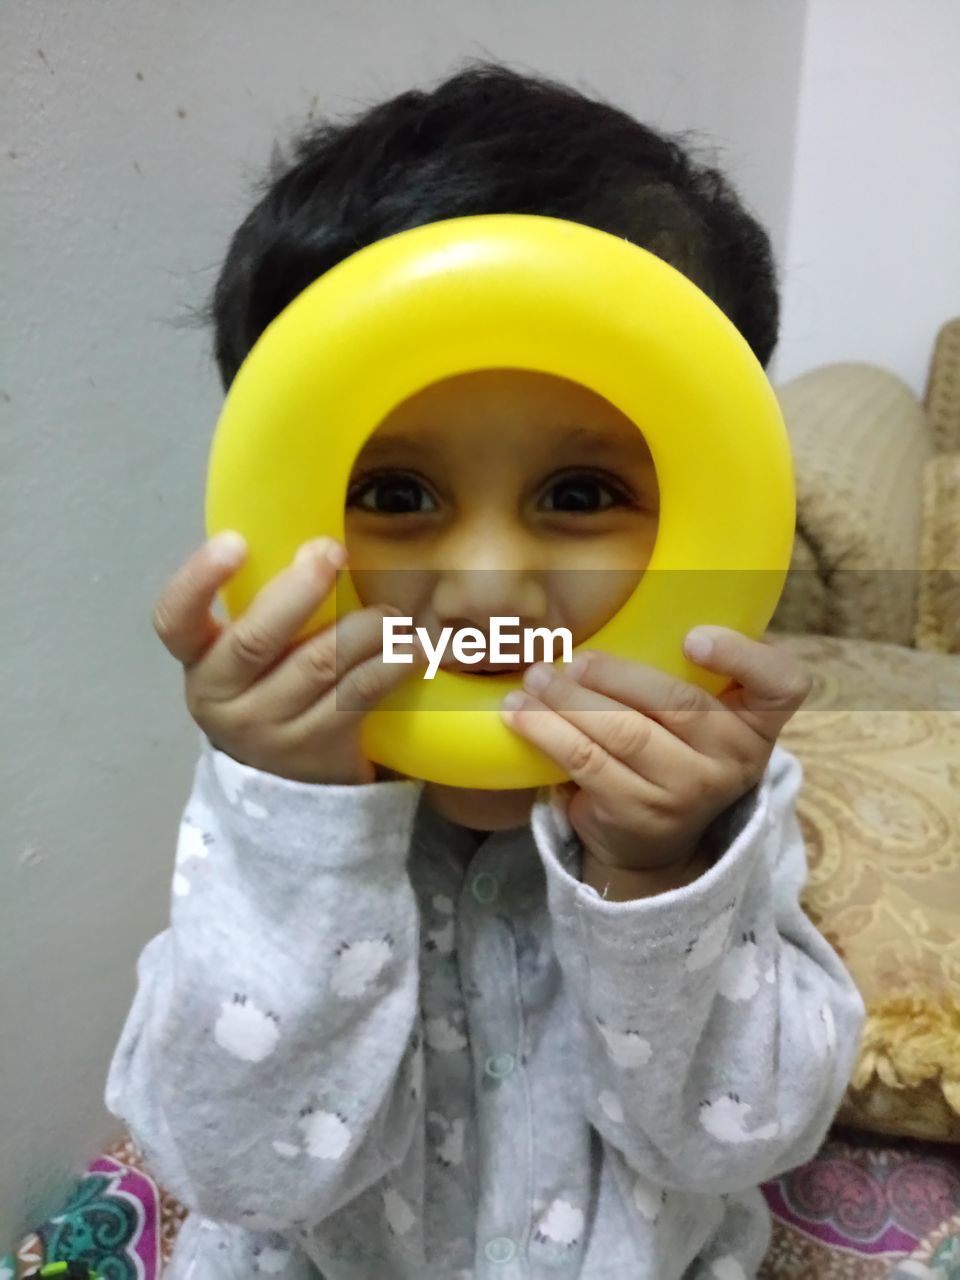 PORTRAIT OF CUTE BABY GIRL HOLDING YELLOW WHILE WEARING MASK